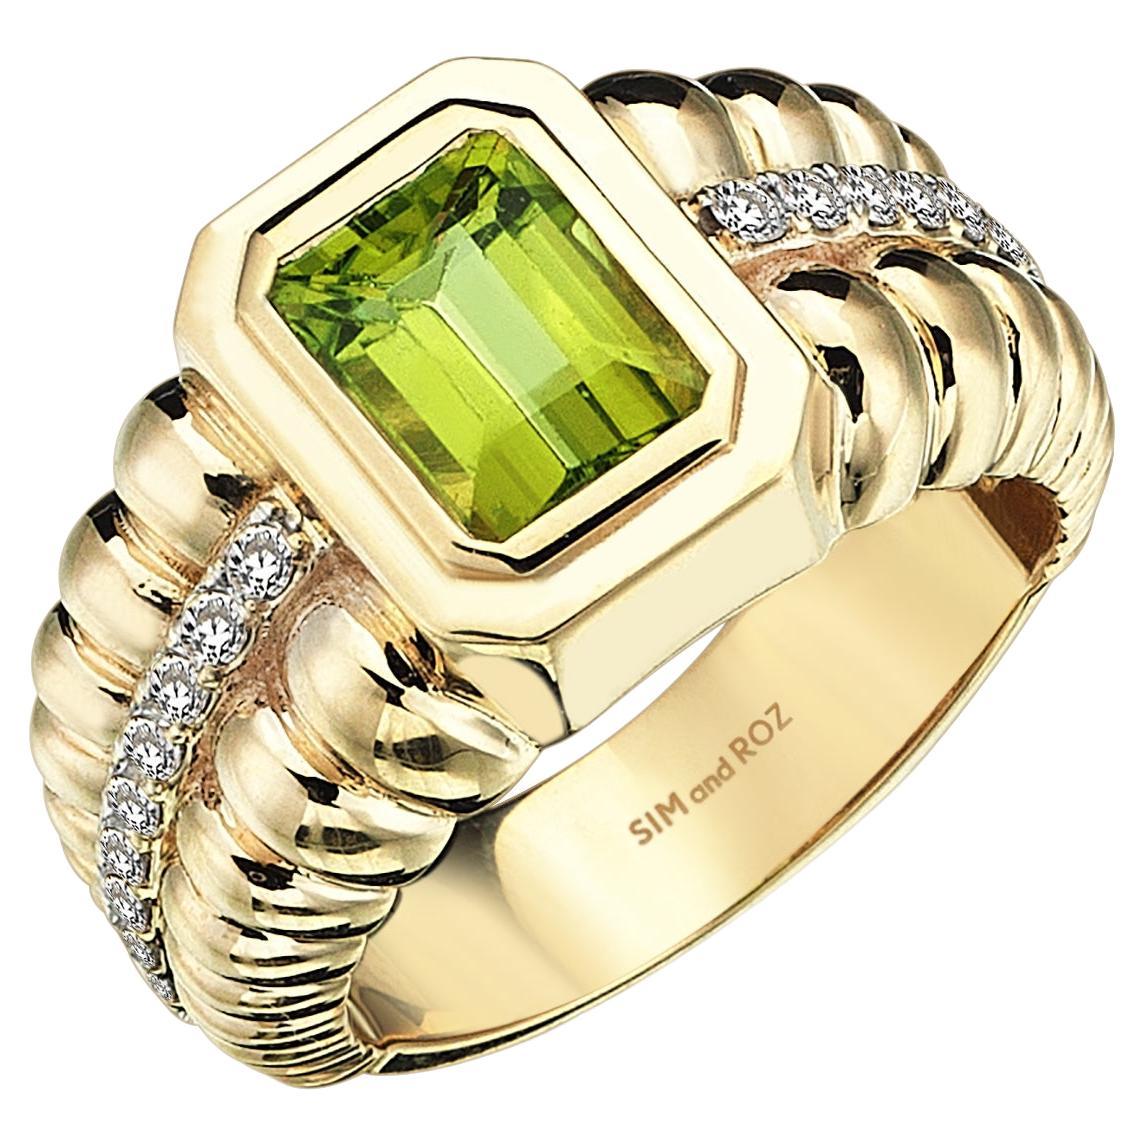 For Sale:  SIM and ROZ 18K Yellow Gold Ring with Round Cut Diamonds and Emerald Cut Peridot